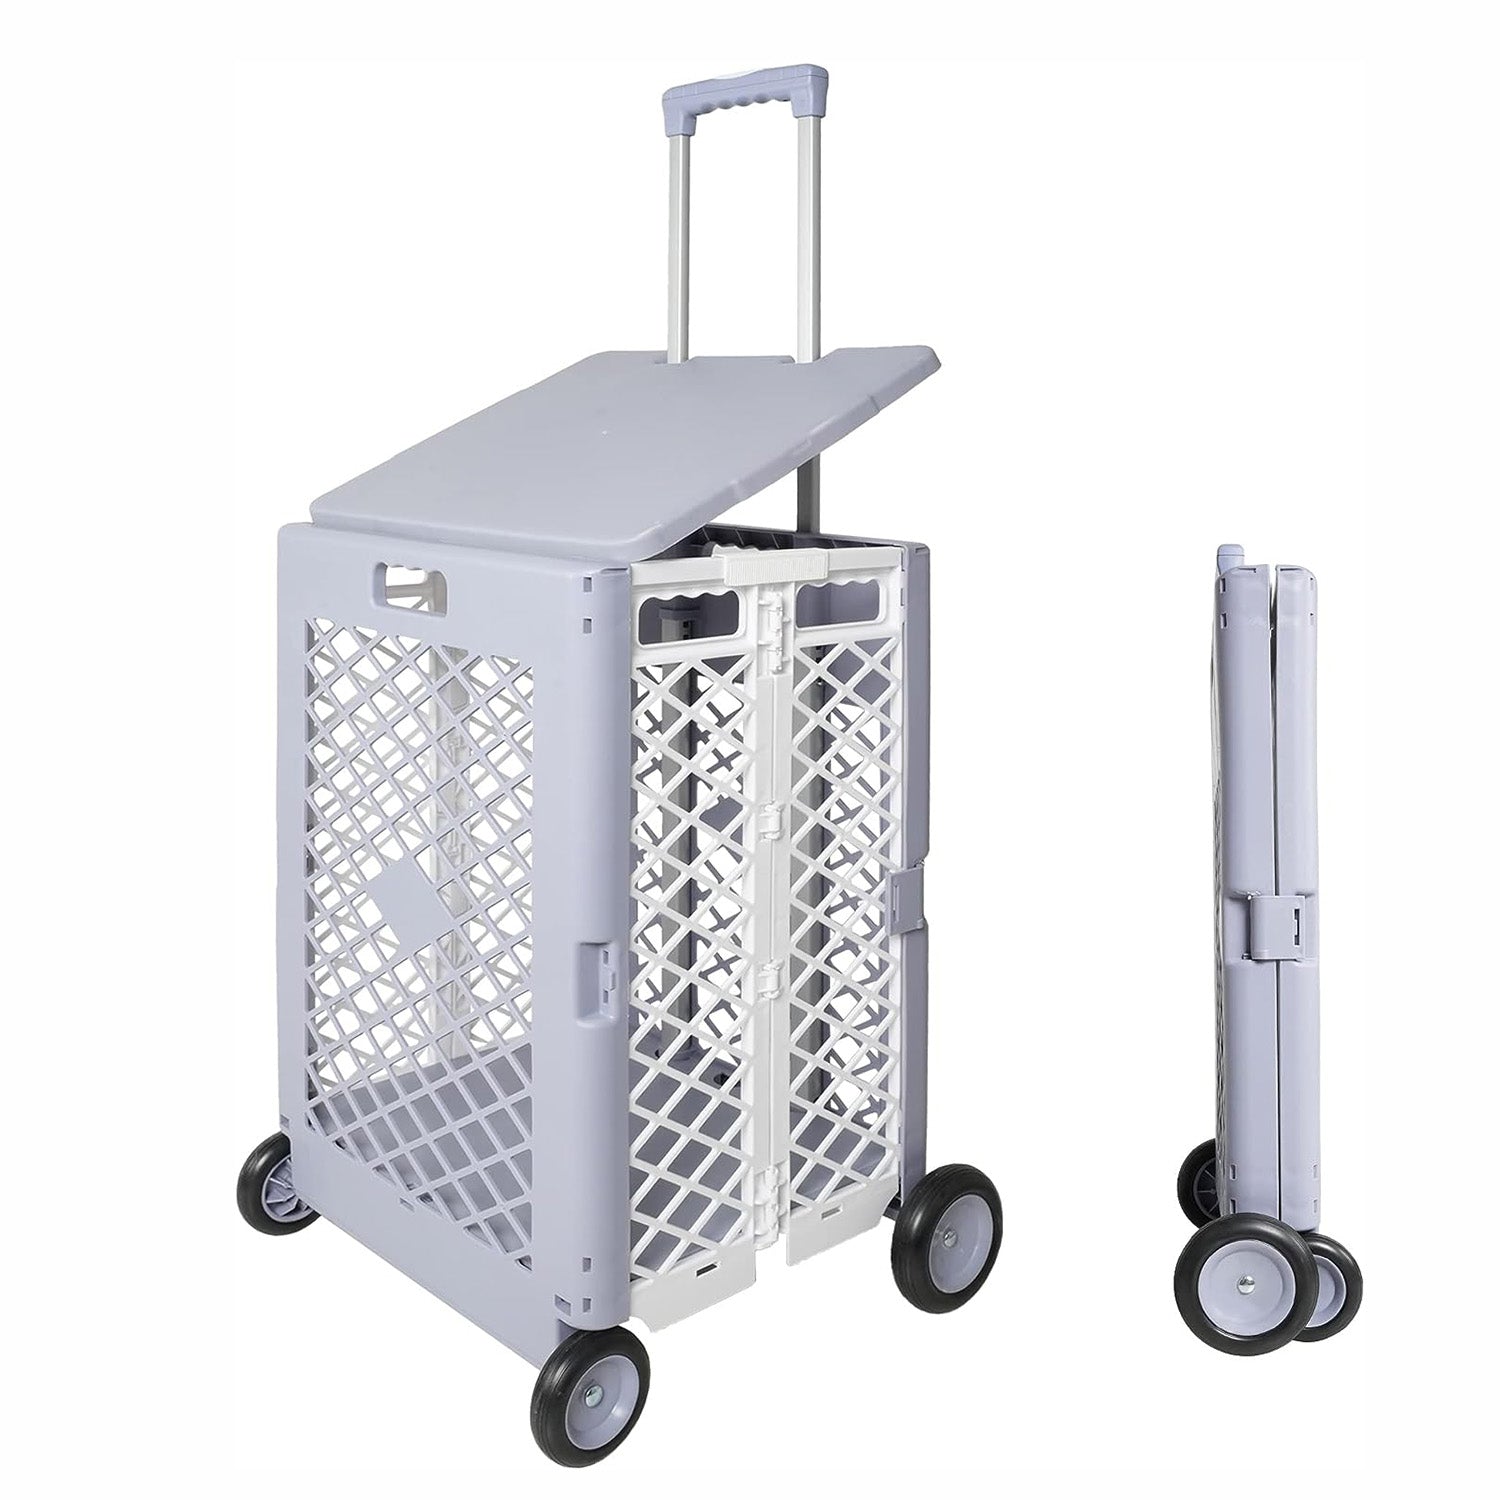 55L Folding Utility Shopping Cart with Lid Wheels Telescopic Handle Collapsible Rolling Crate, Gray